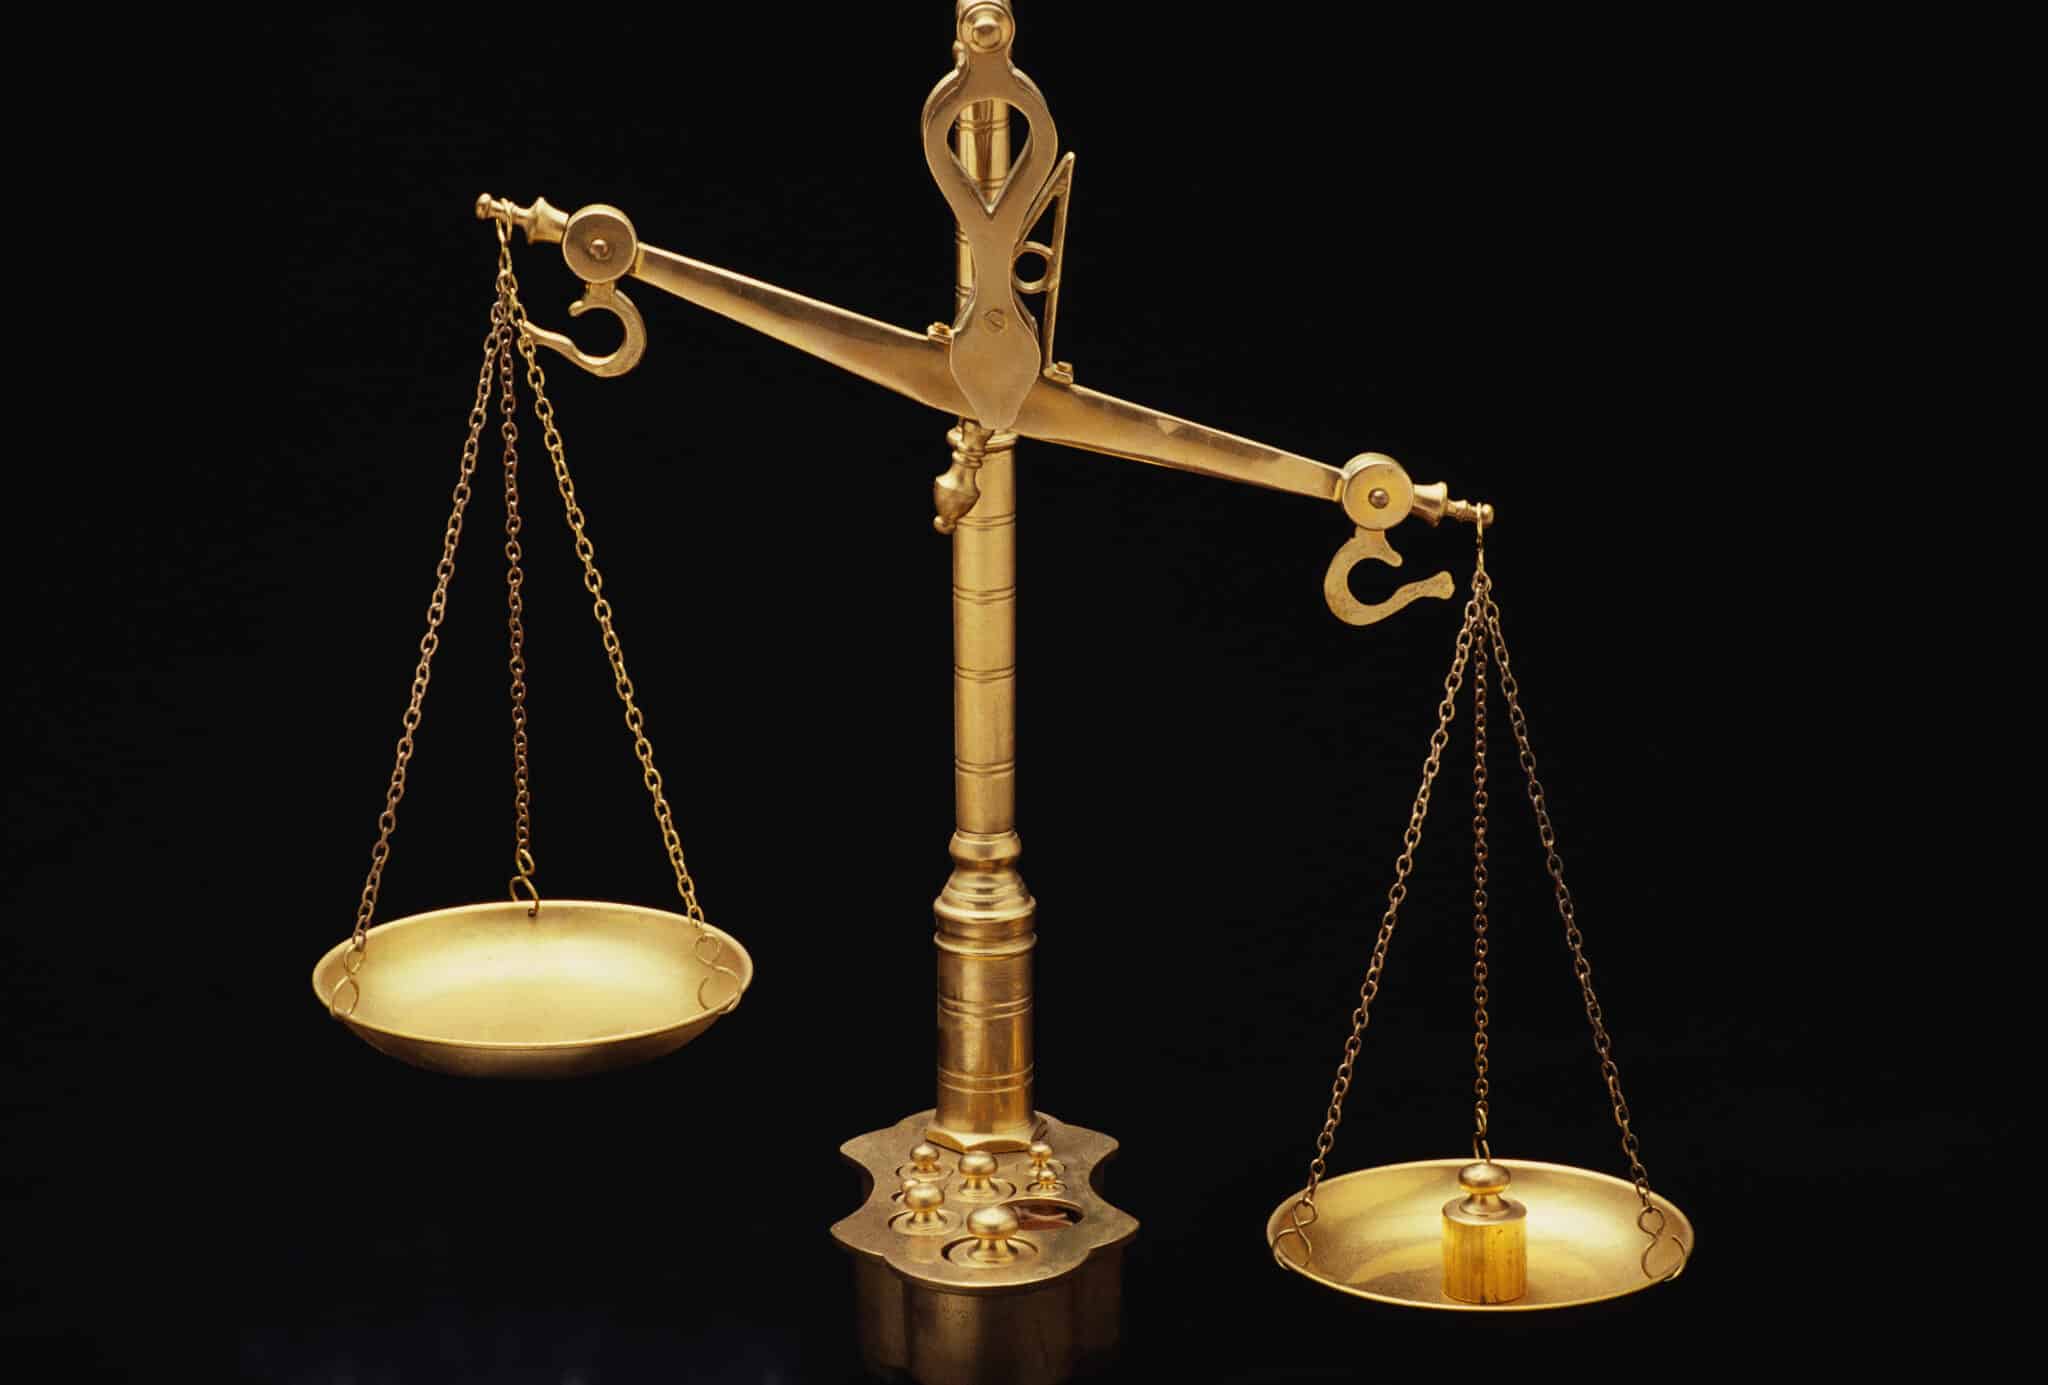 These are the golden Scales of Justice, They represent the legal system and courts, The scales here are shown unbalanced with the left side weighing heavier than the right, They are shown against a black background. (Photo by: Joe Sohm/Visions of America/Universal Images Group via Getty Images)